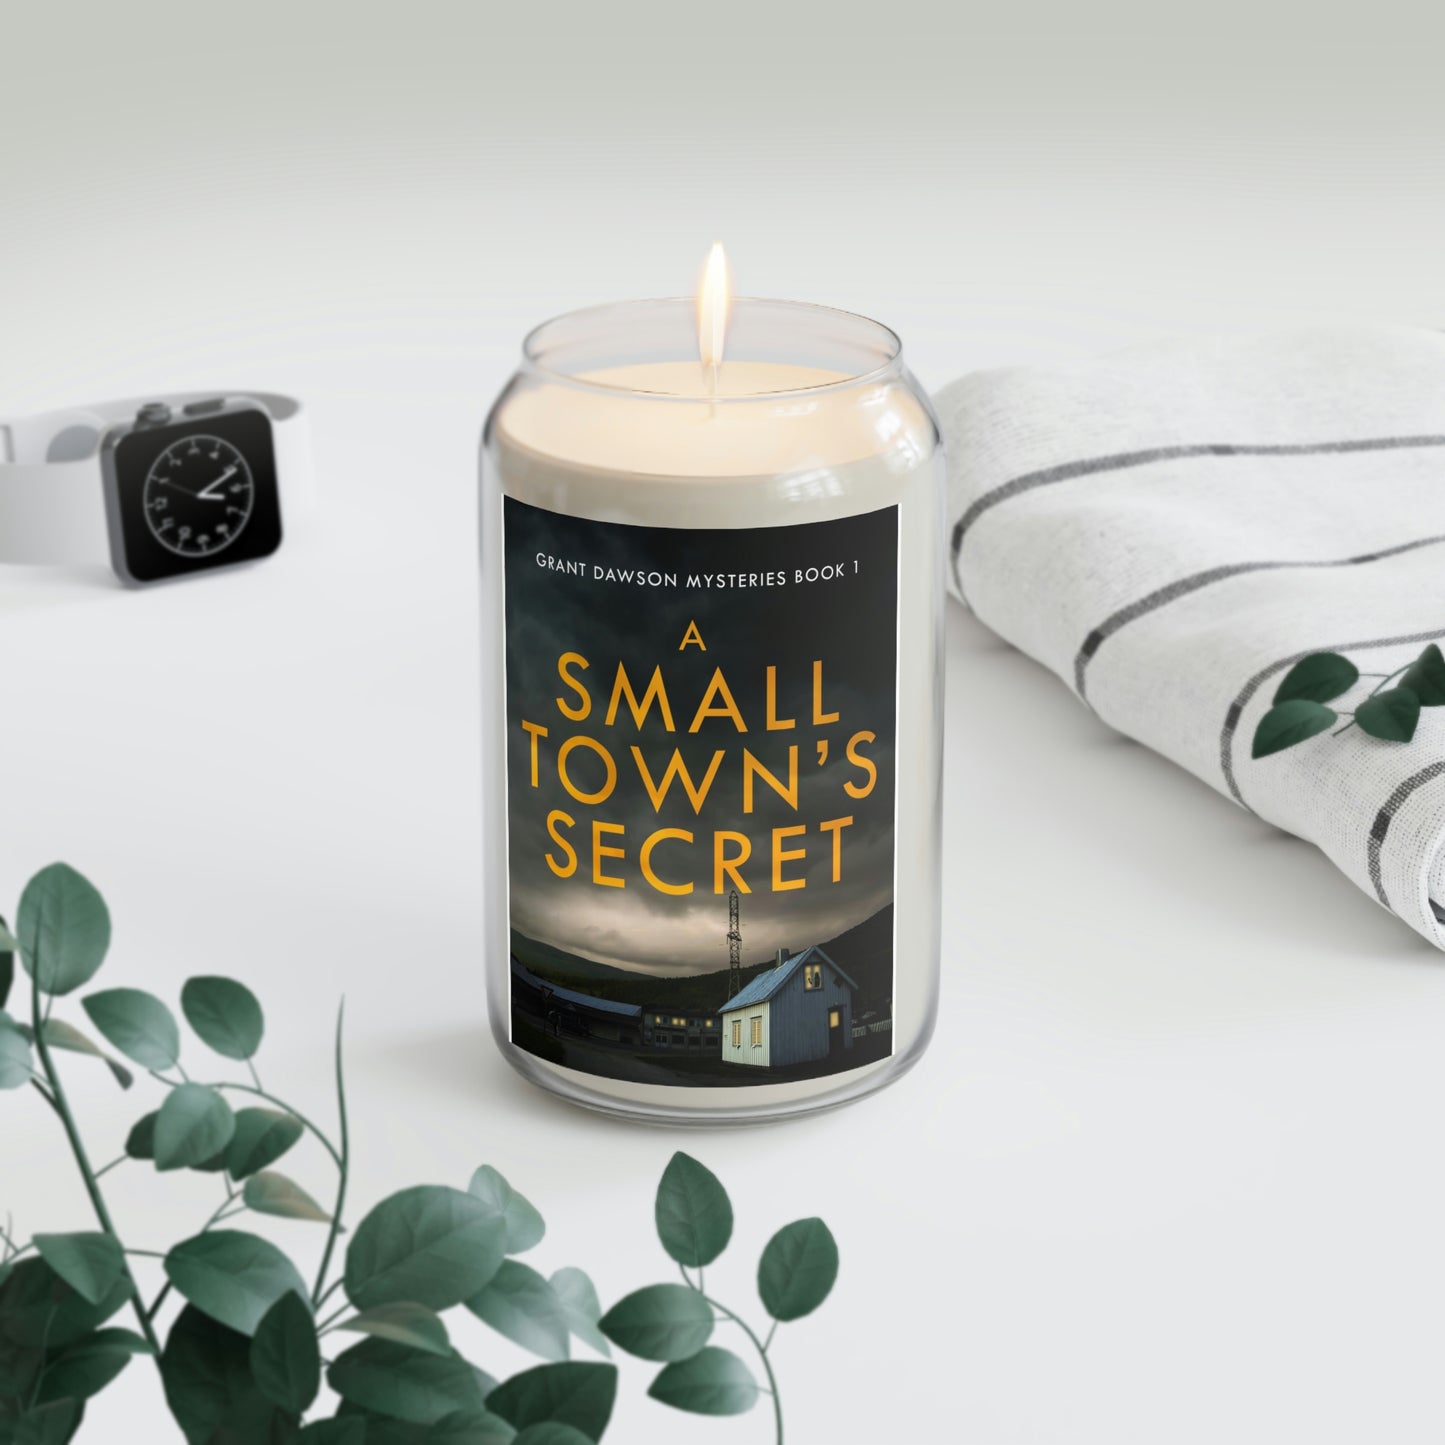 A Small Town's Secret - Scented Candle